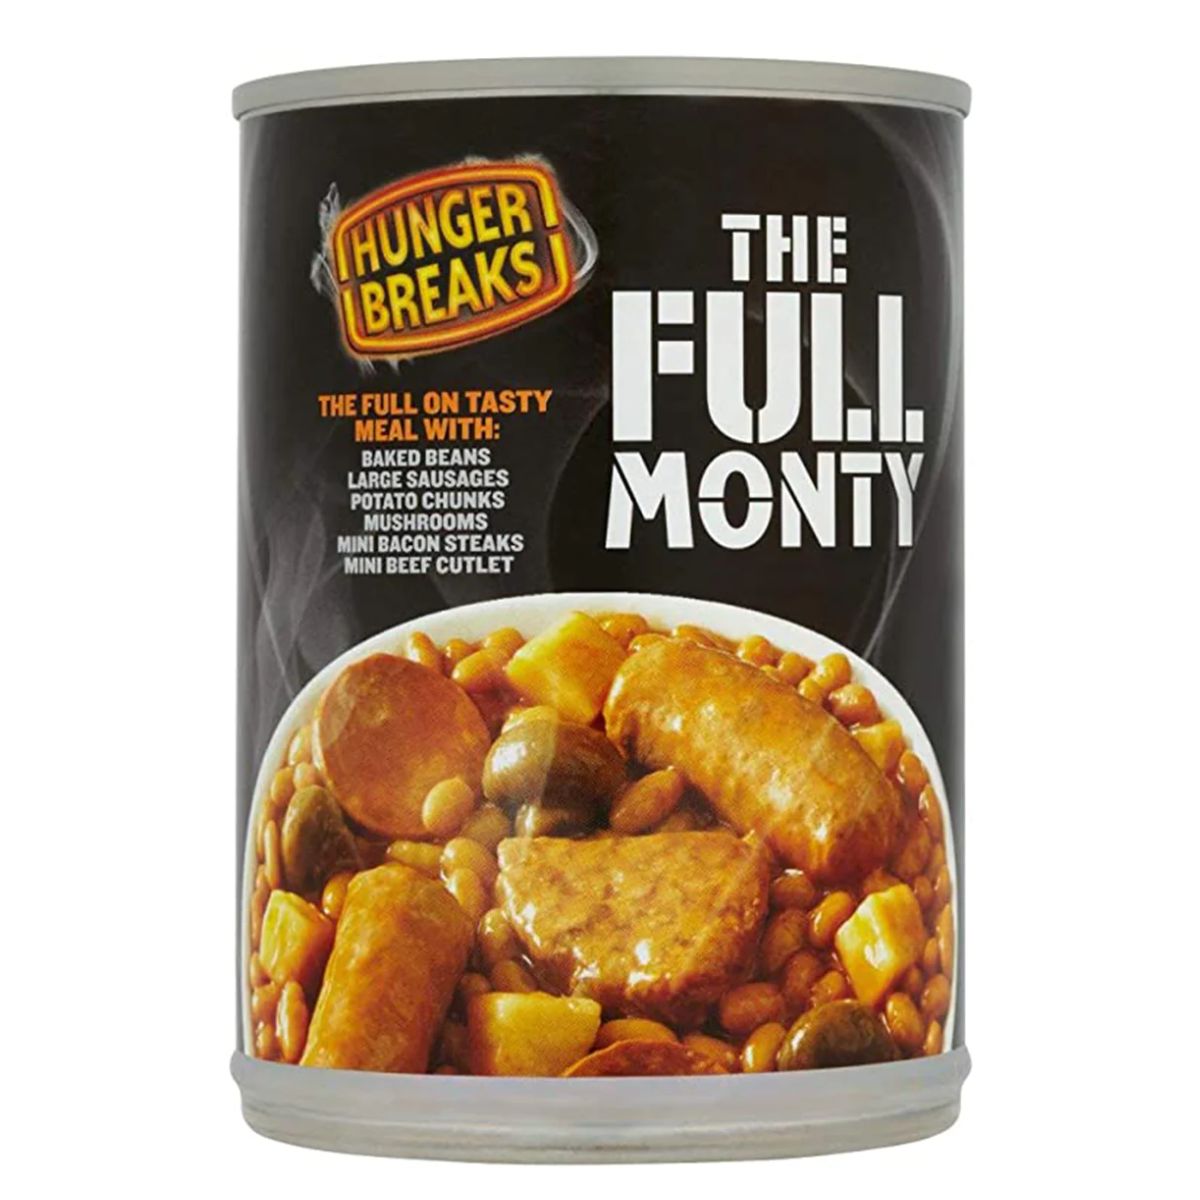 Sentence with replacement: Can of Hunger Breaks - The Full Monty - 395g featuring a full meal with baked beans, large sausages, mushrooms, pork chunks, mini bacon steaks, and mini beef cutlet.